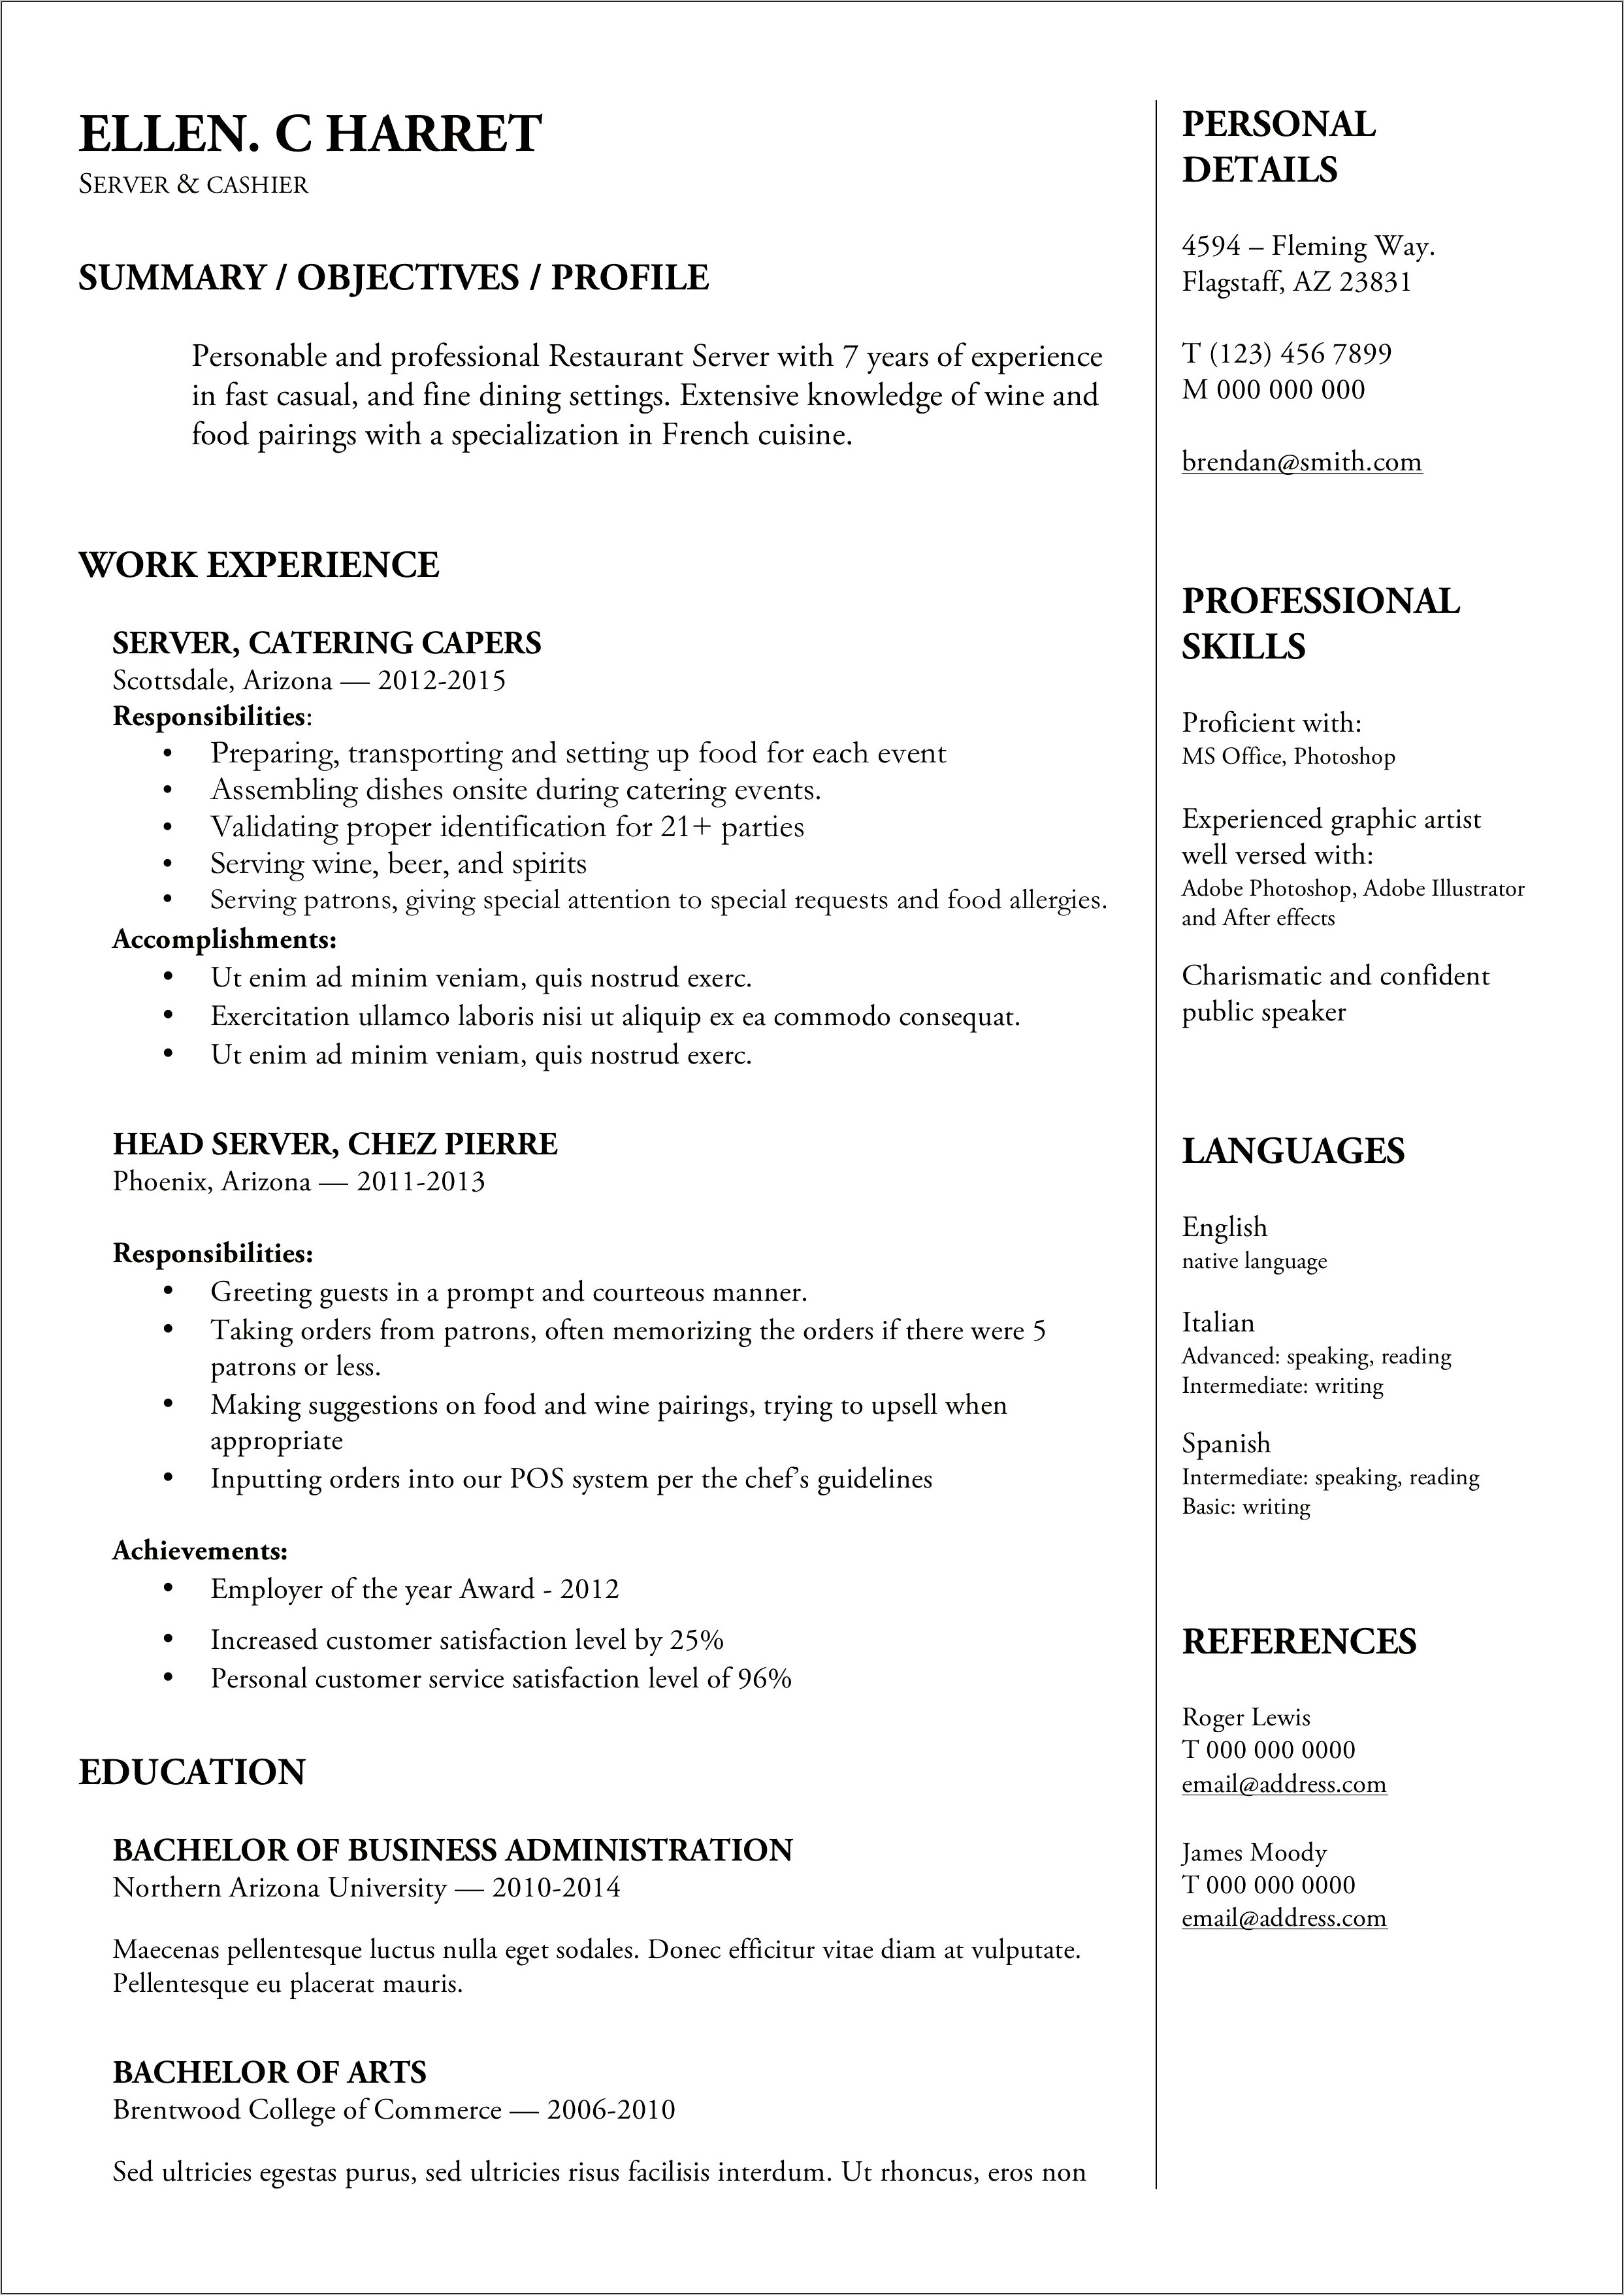 Customer Service Words To Use On Resume